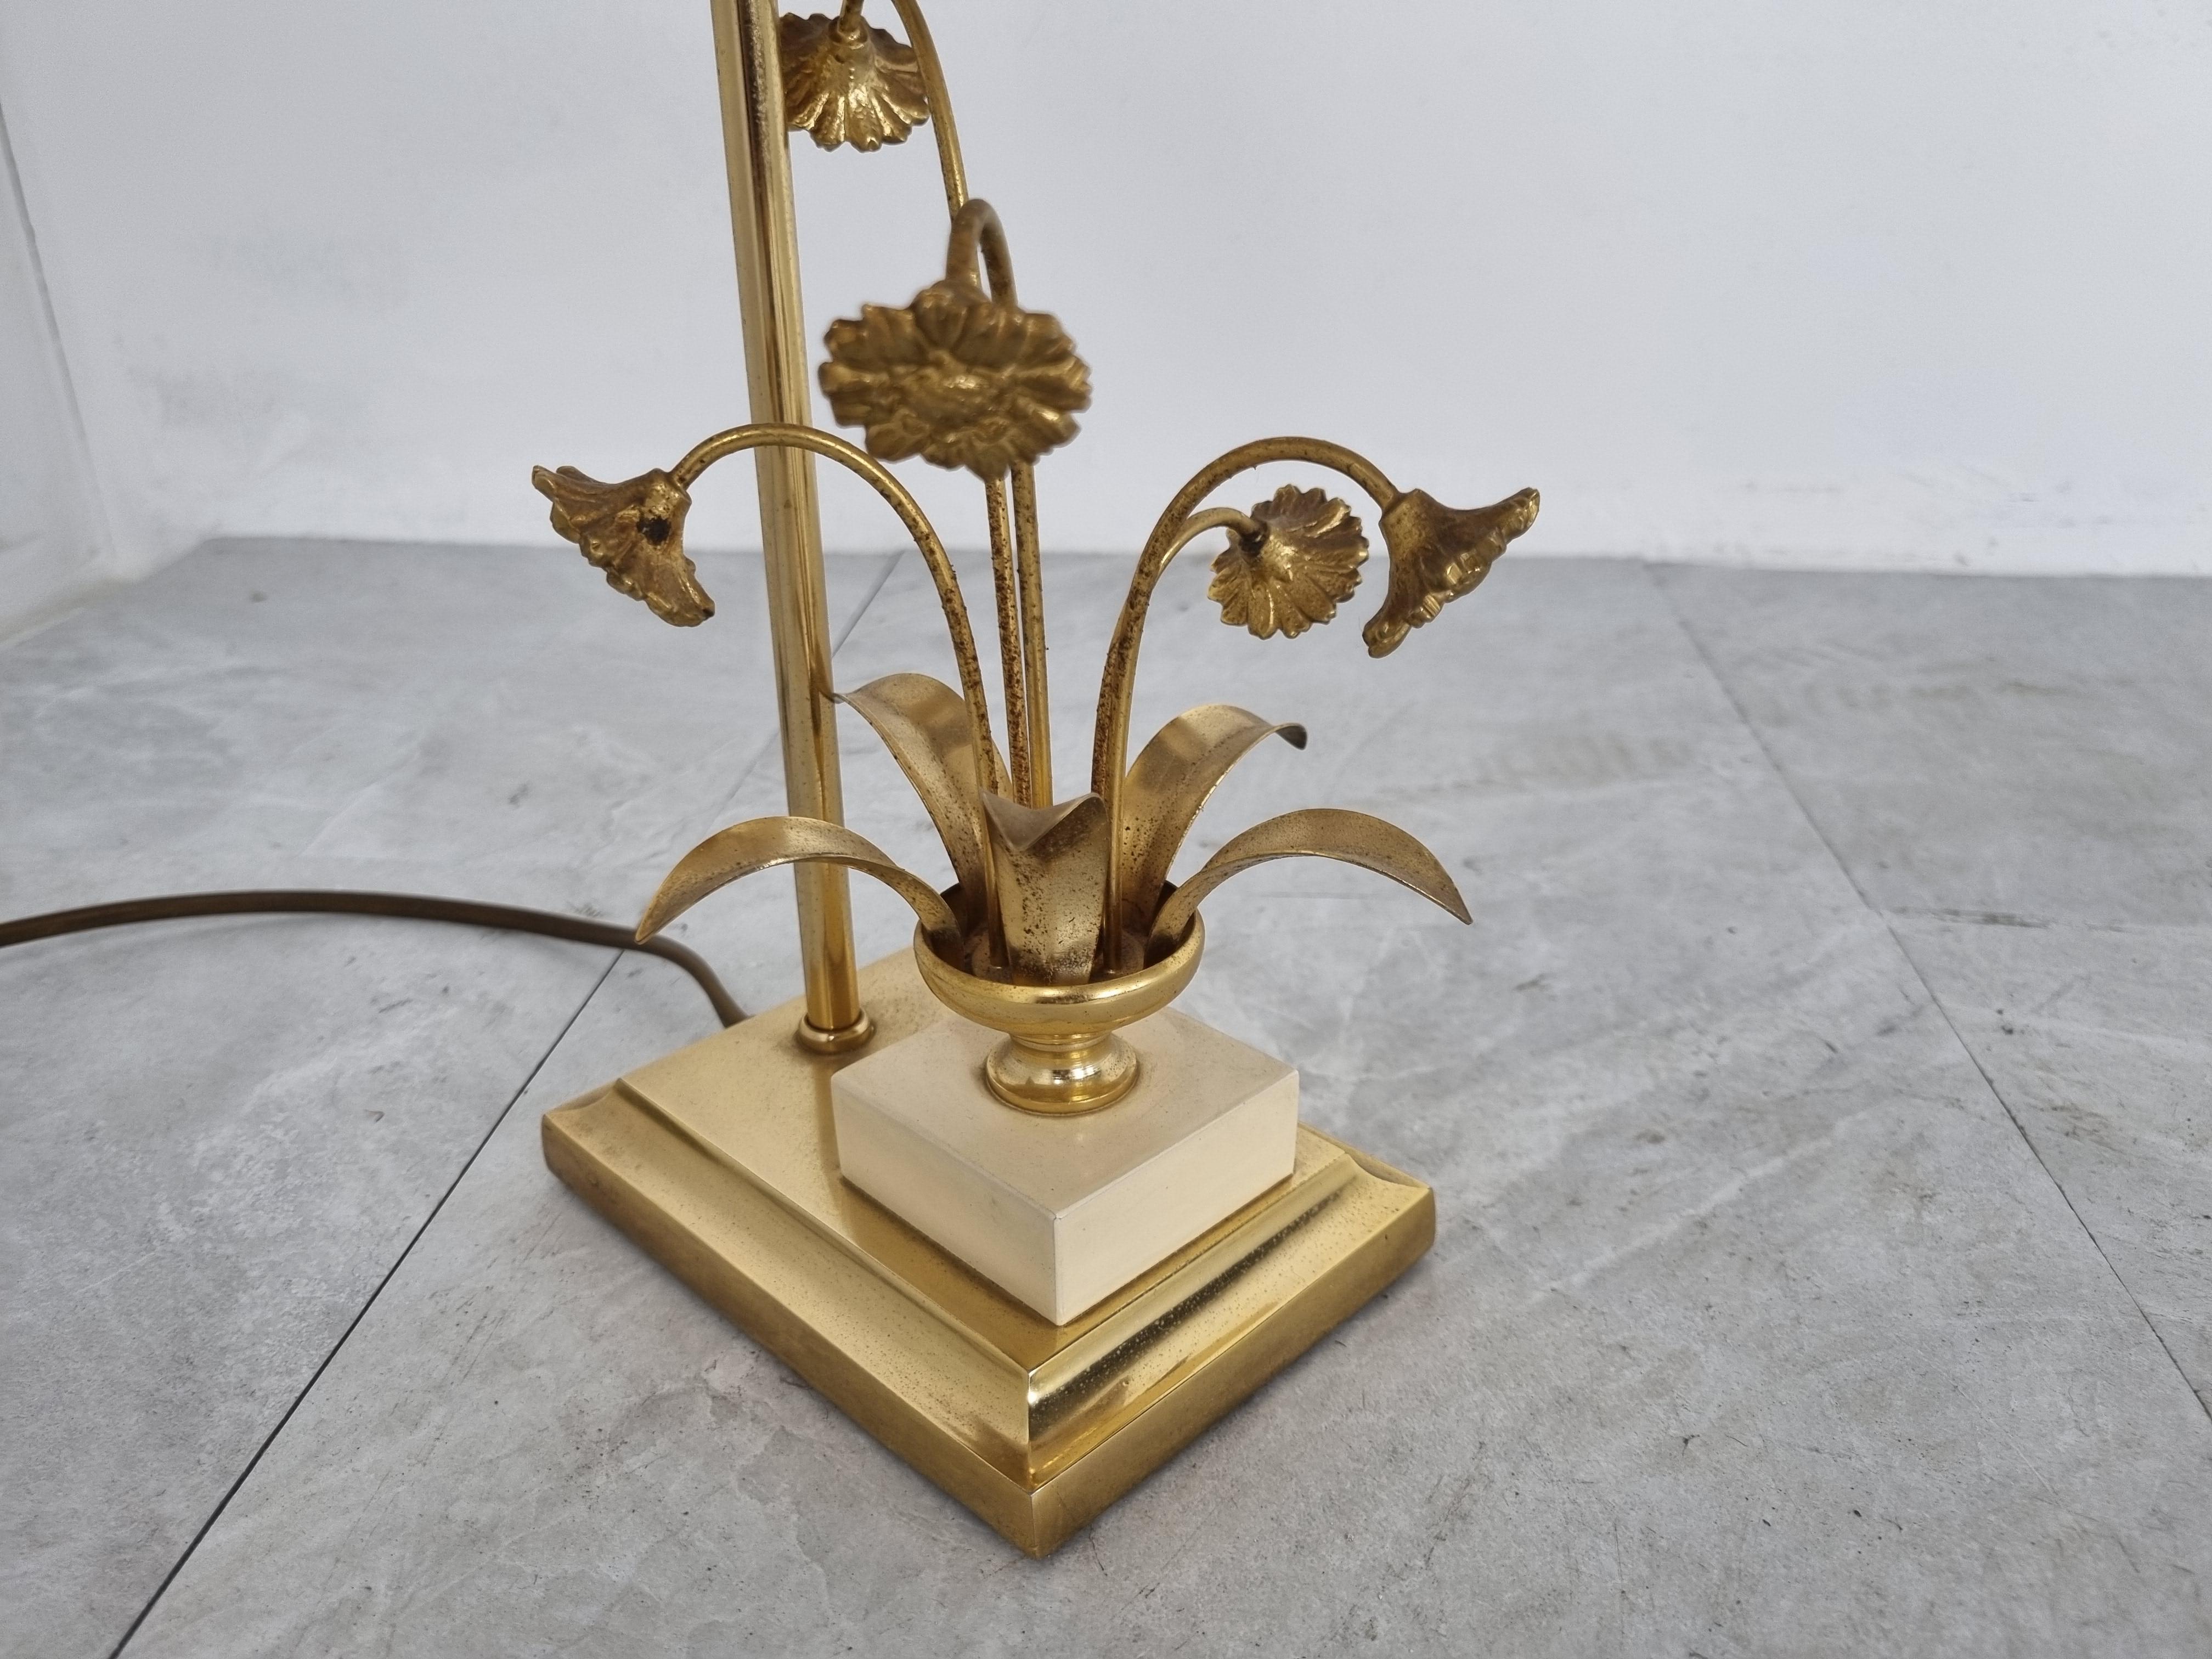 Vintage brass flower table lamp on a brass base by Massive.

Cool hollywood regency style table lamp.

Condition: some corrosion on the flowers.

Comes with it's original lamp shade

1970s - Belgium

Tested and ready to use with a regular